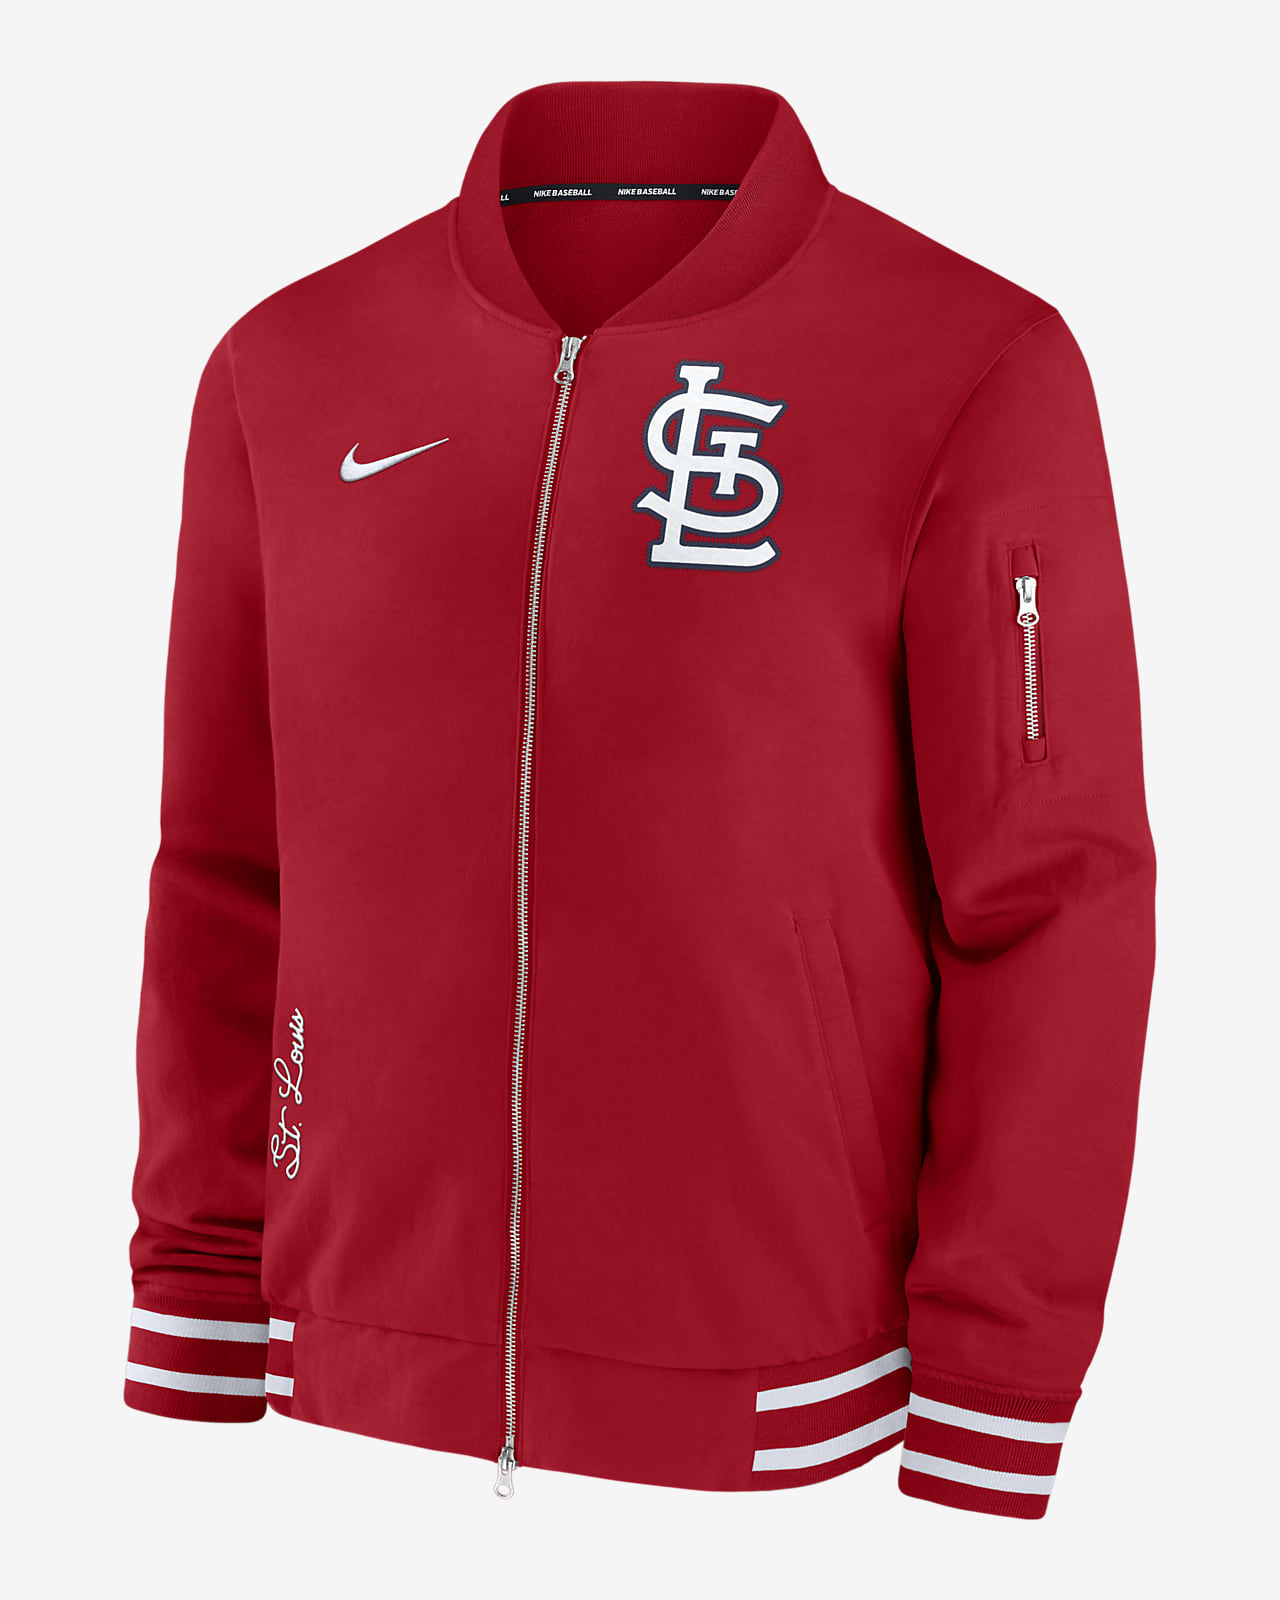 St. Louis Cardinals Authentic Collection Men's Nike MLB Full-Zip Bomber Jacket